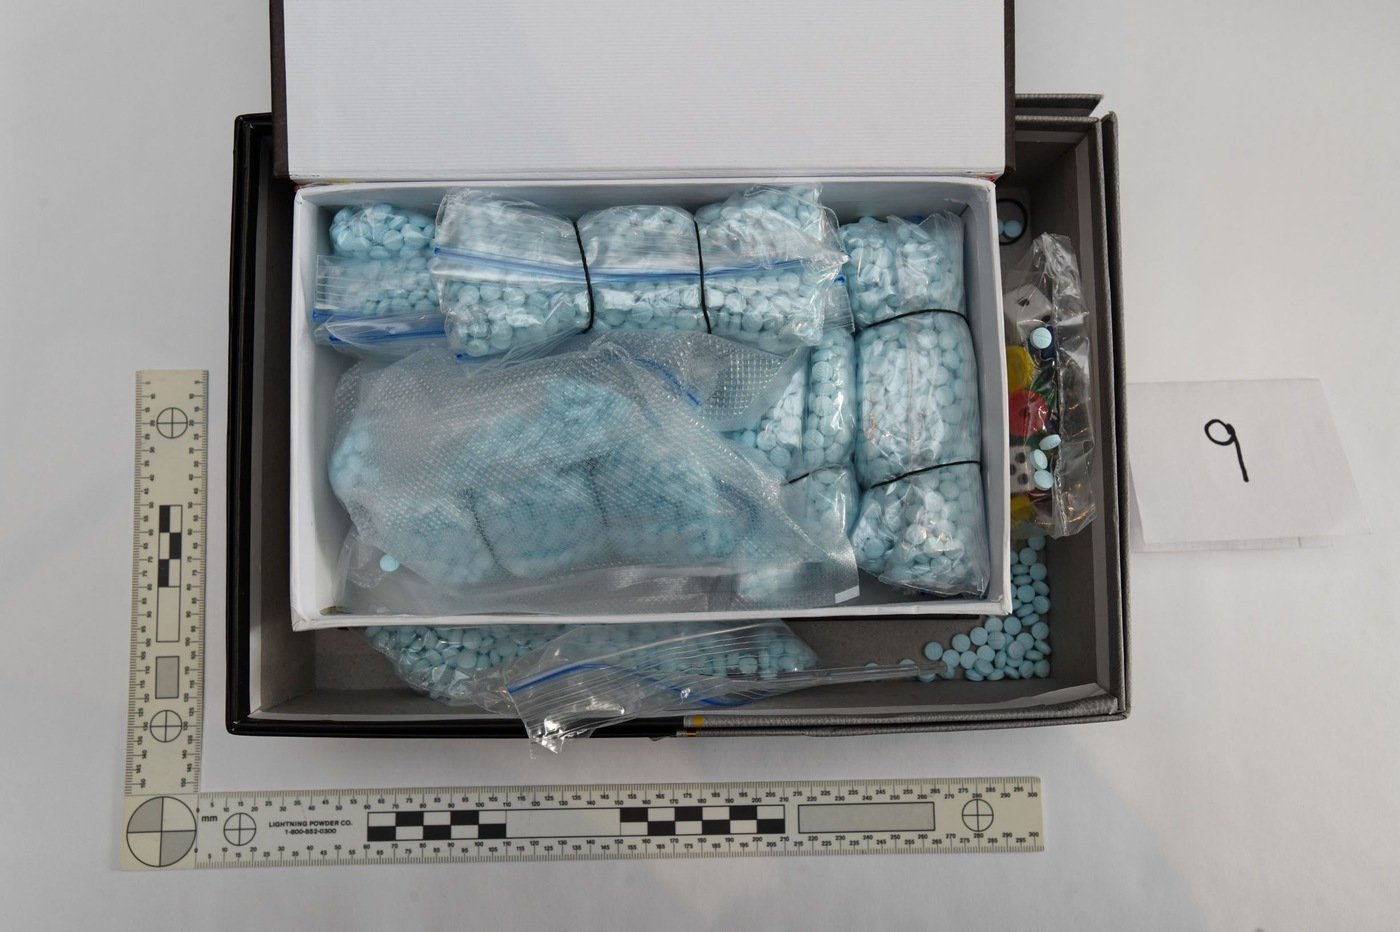 Drugs seized in Joint Criminal Opioid and Darknet Enforcement (JCODE) operation in 2021.